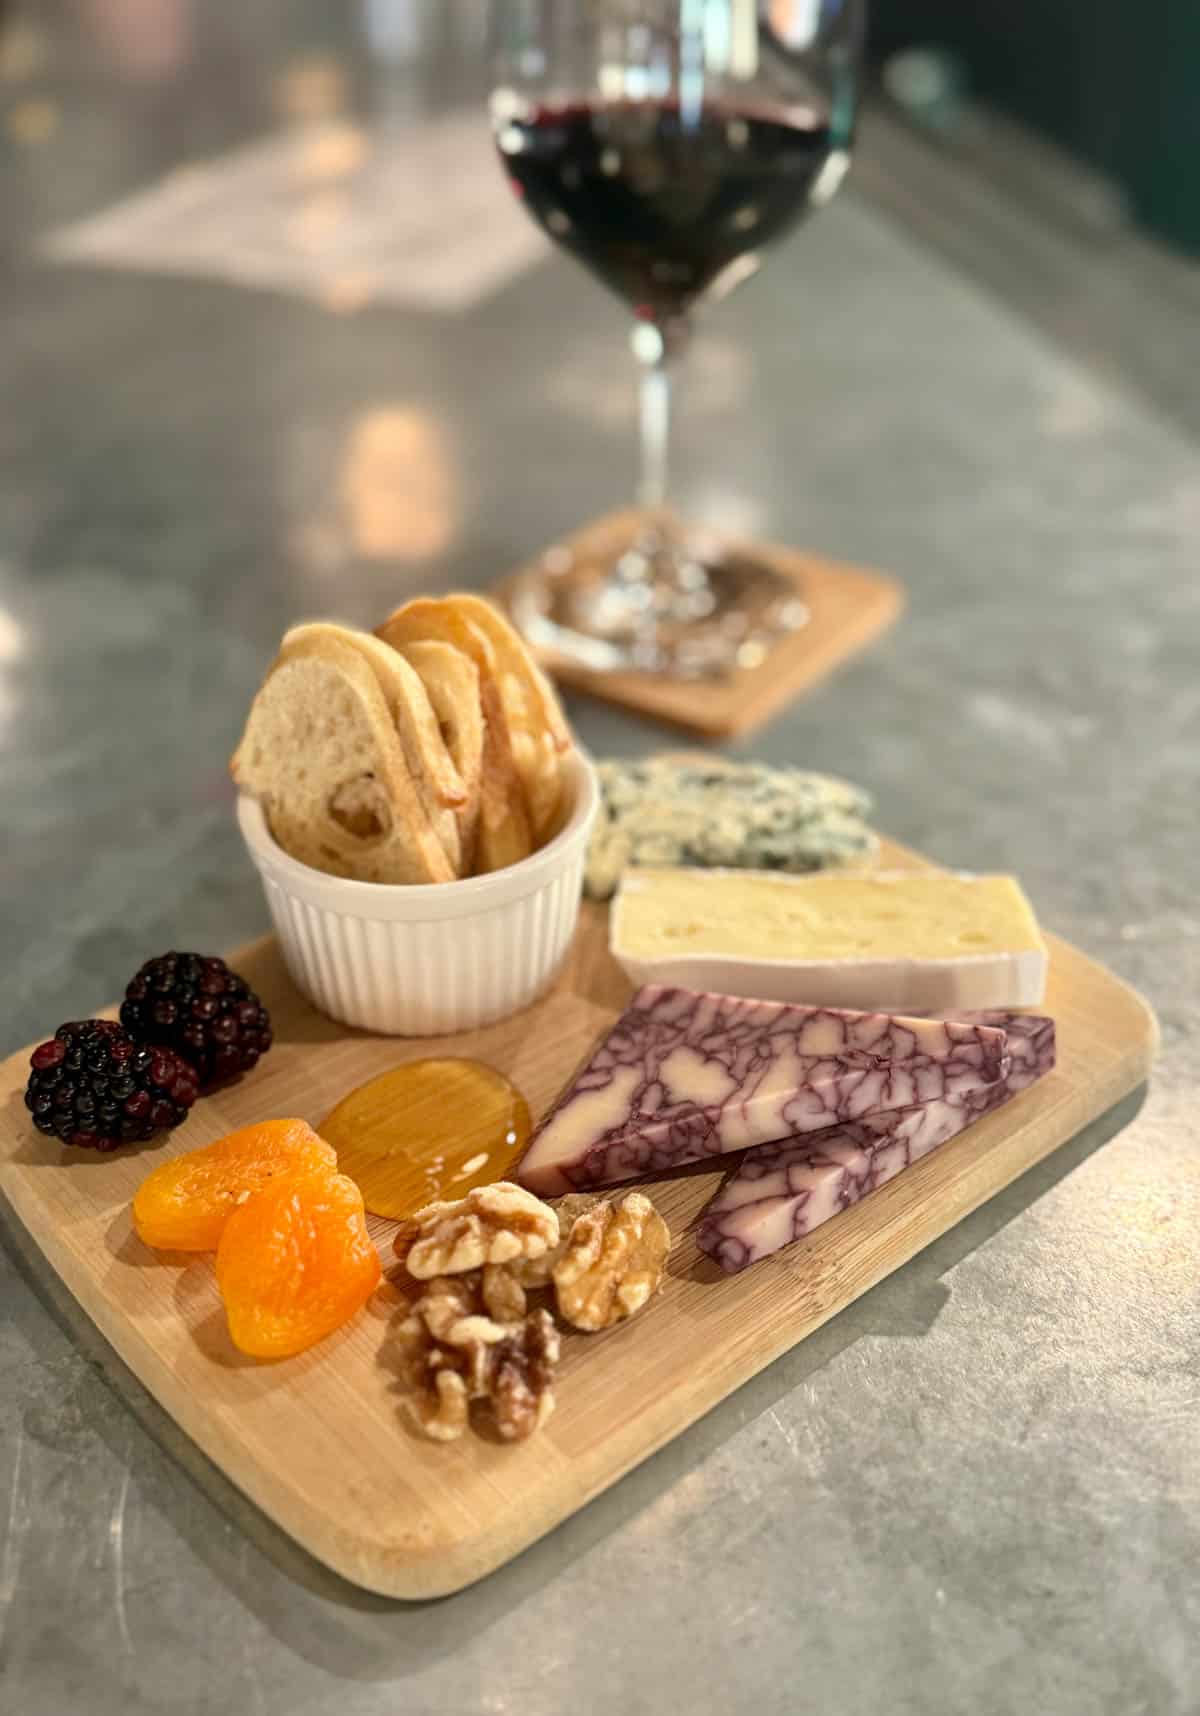 Cheese platter with dried fruit and honey and side of bread with glass of wine.